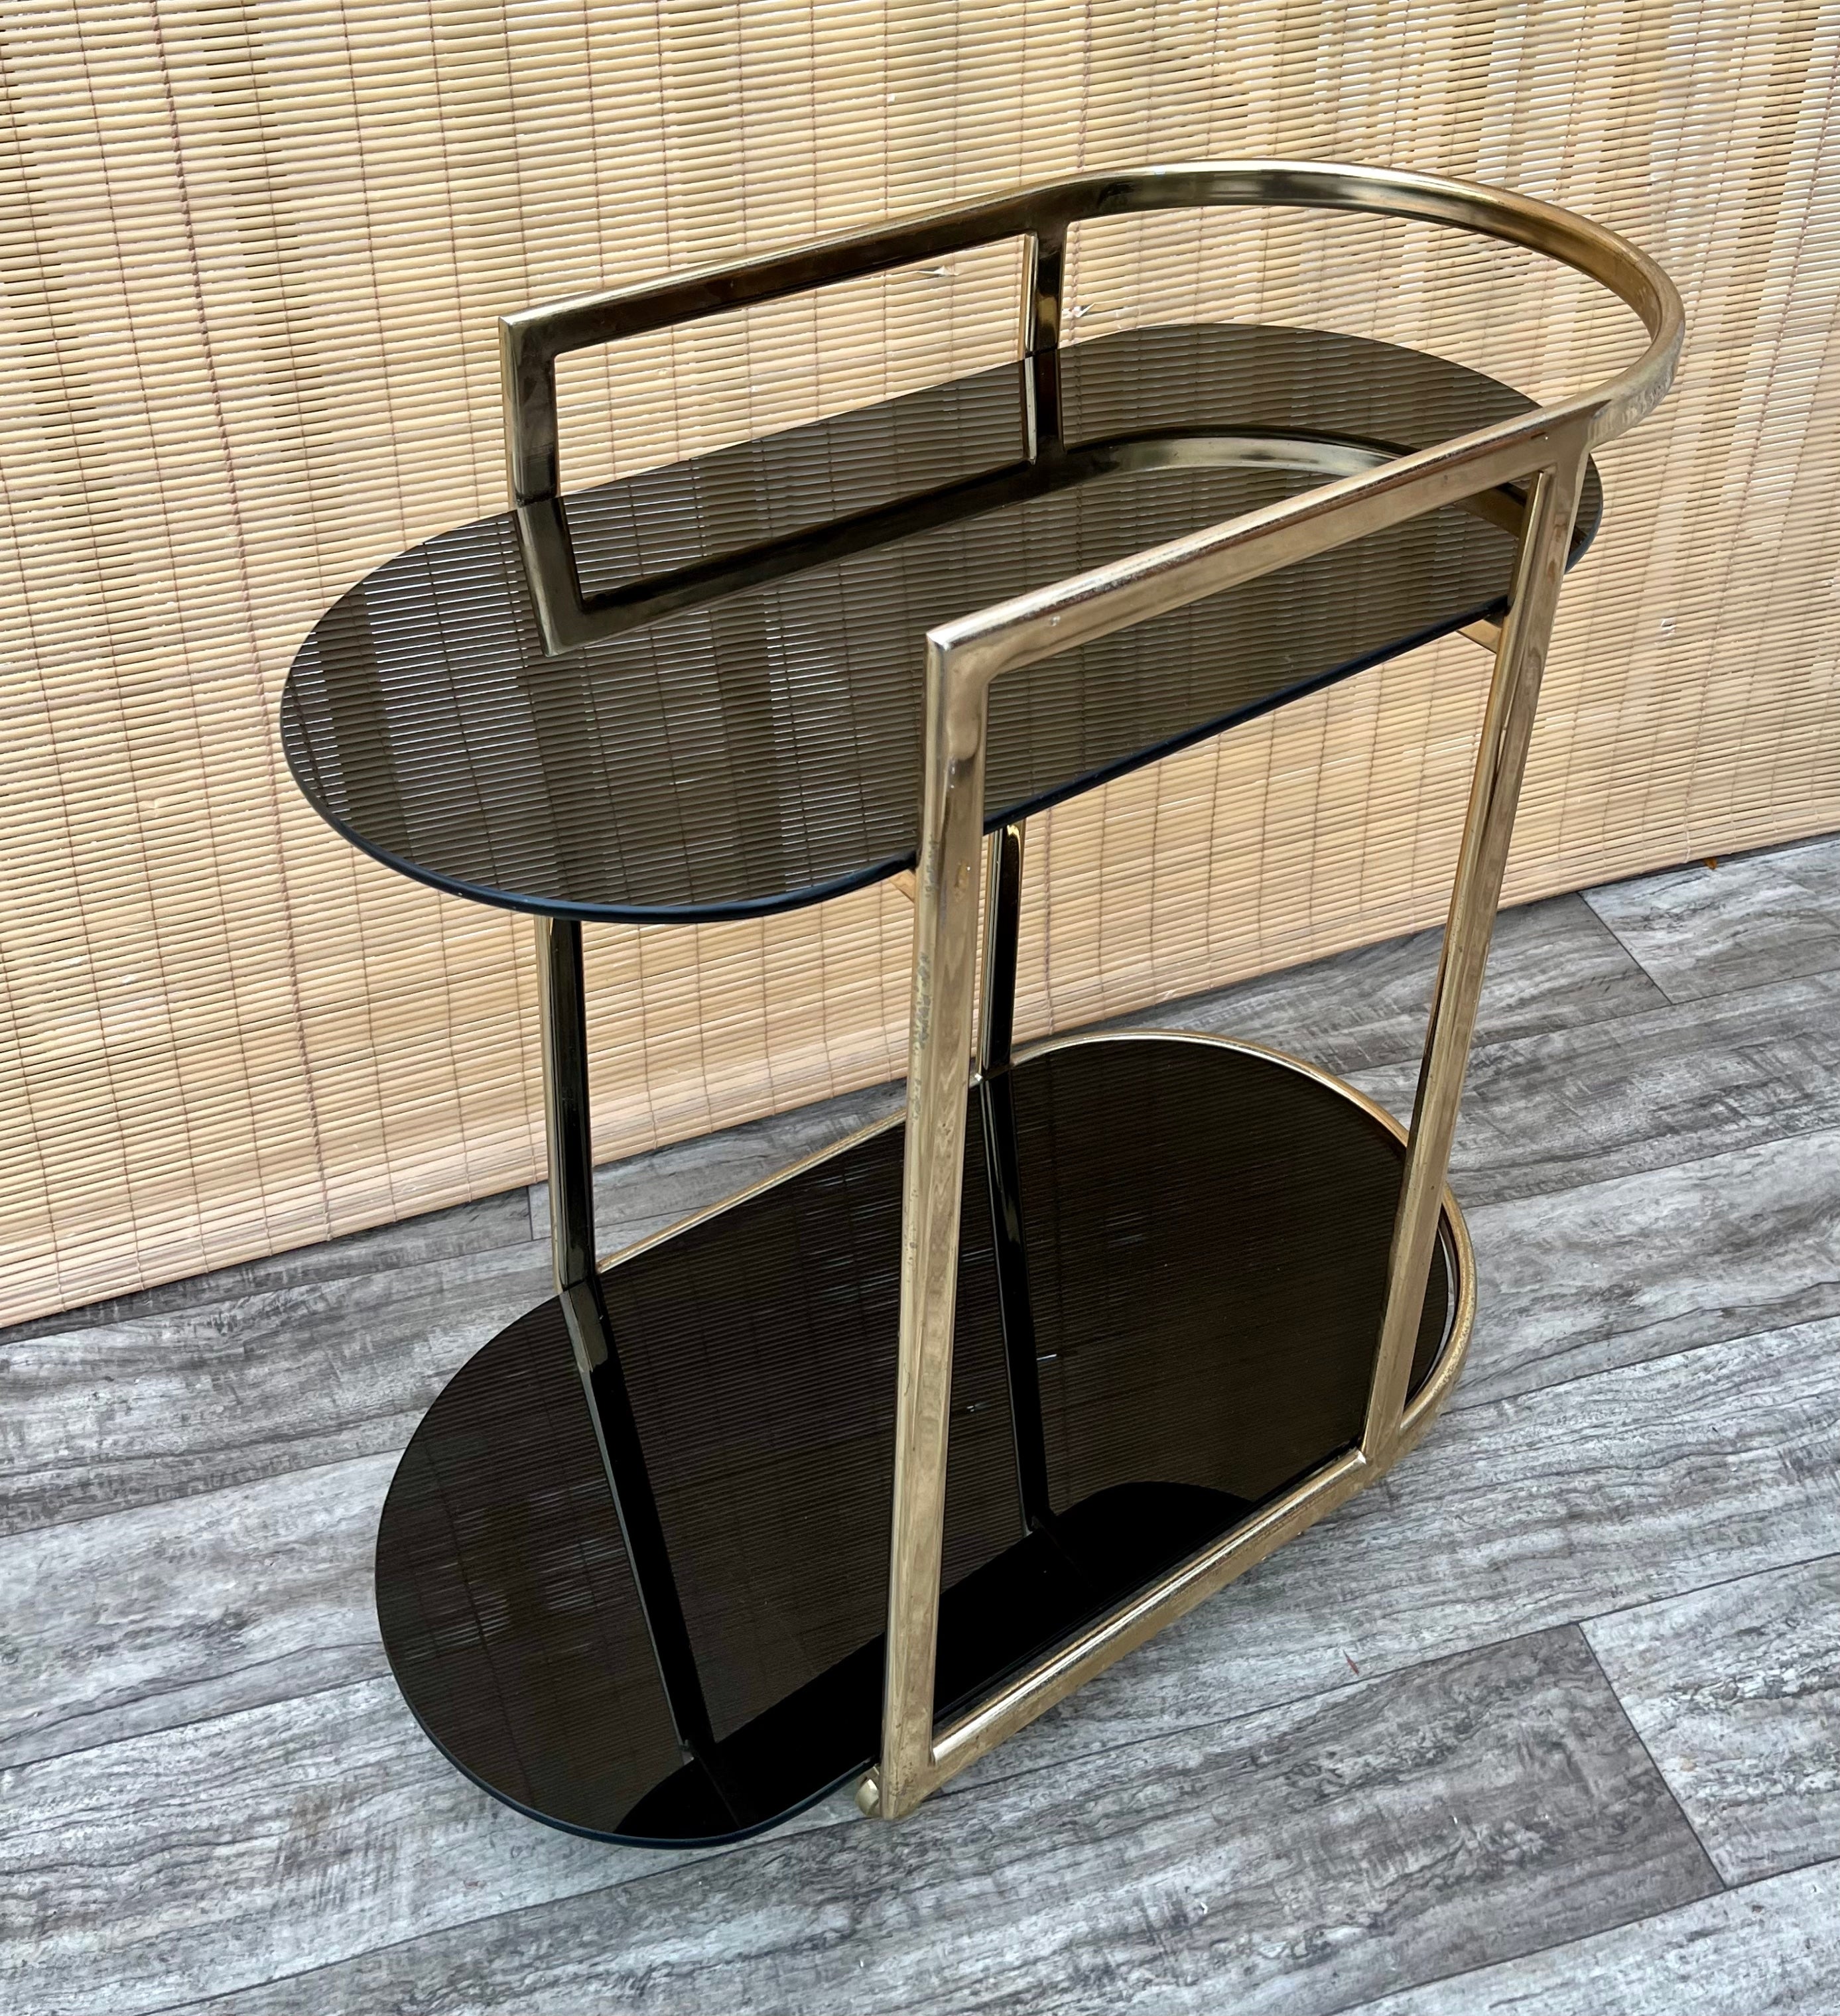 Vintage Mid Century Modern Two Tier Brass & Glass Dry Bar/ Serving Cart. Circa 1970s
Features a Hollywood regency inspired design with a brass plated frame, two tiers with rounded almost black-finish mirror glass shelves and casters for easy